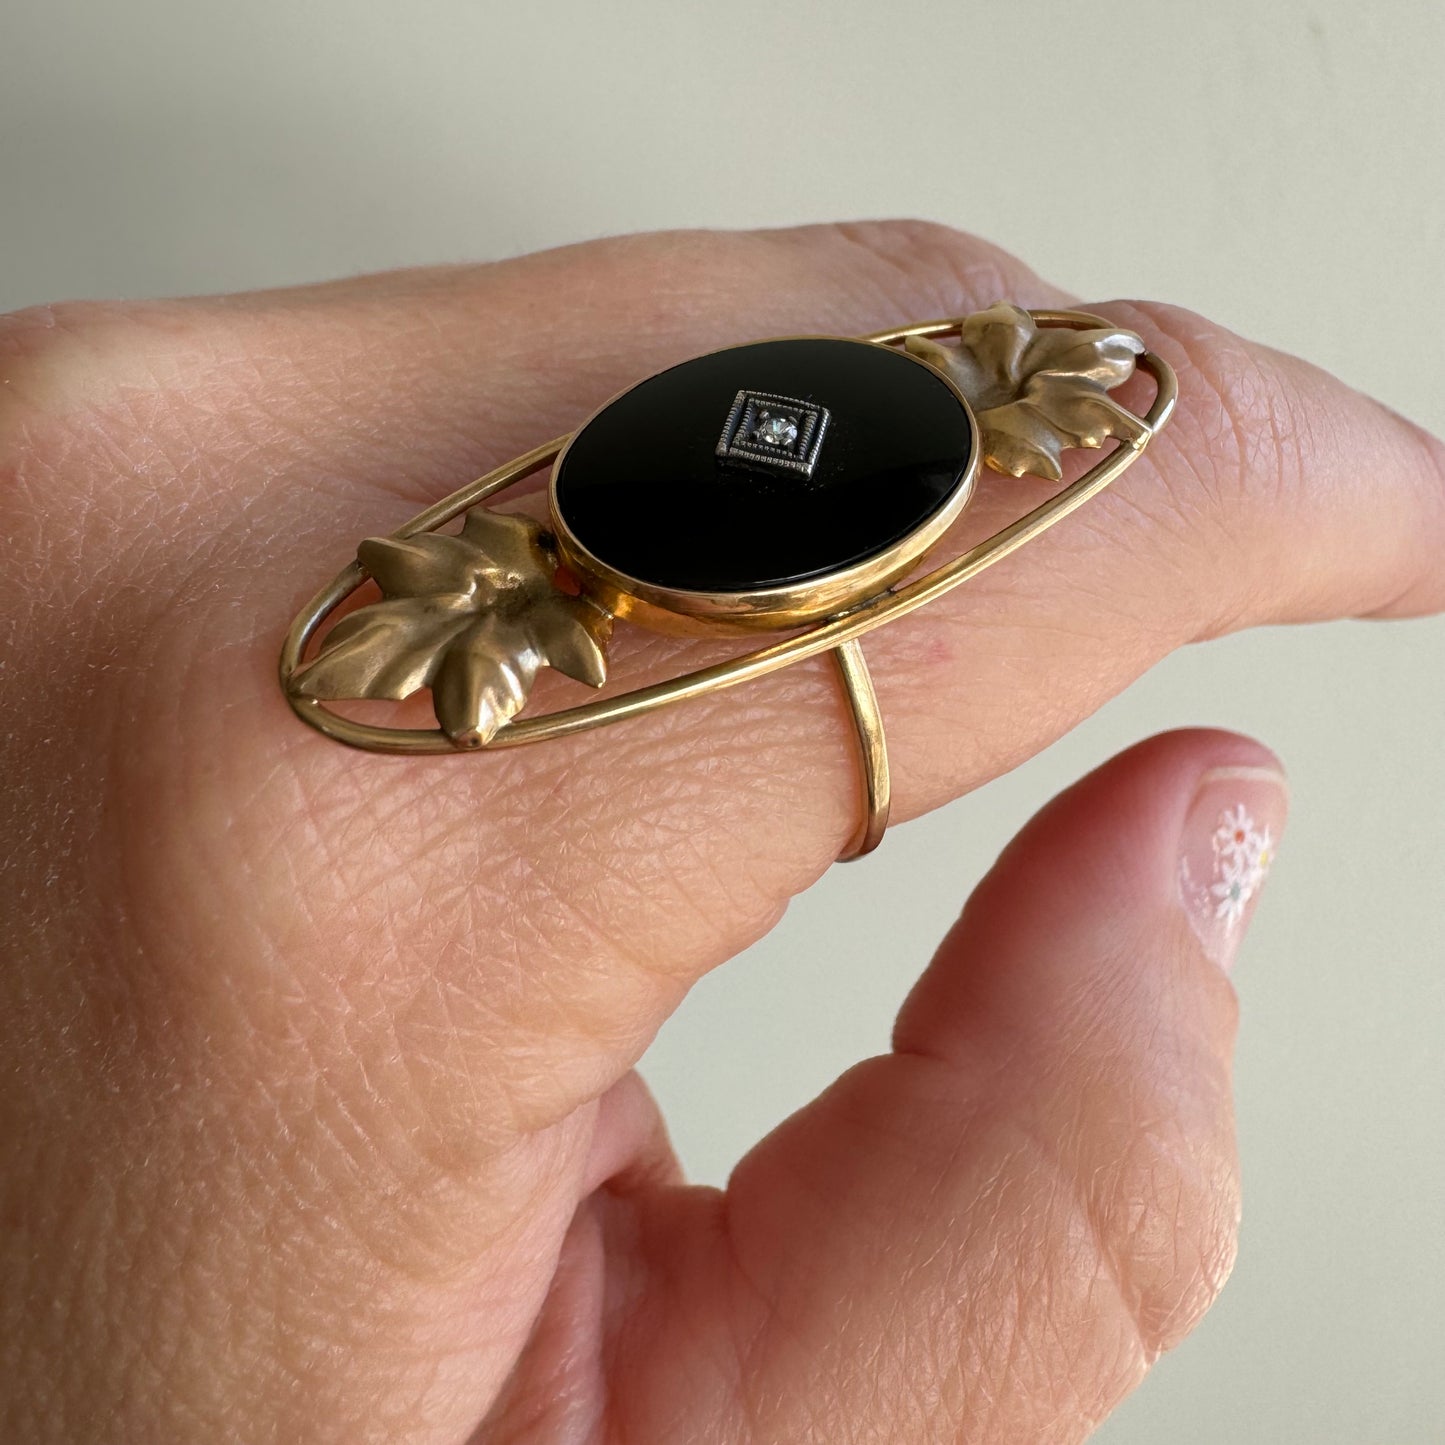 reimagined V I N T A G E // forest shield / 10k yellow gold onyx and diamond / a full finger ring / size 7